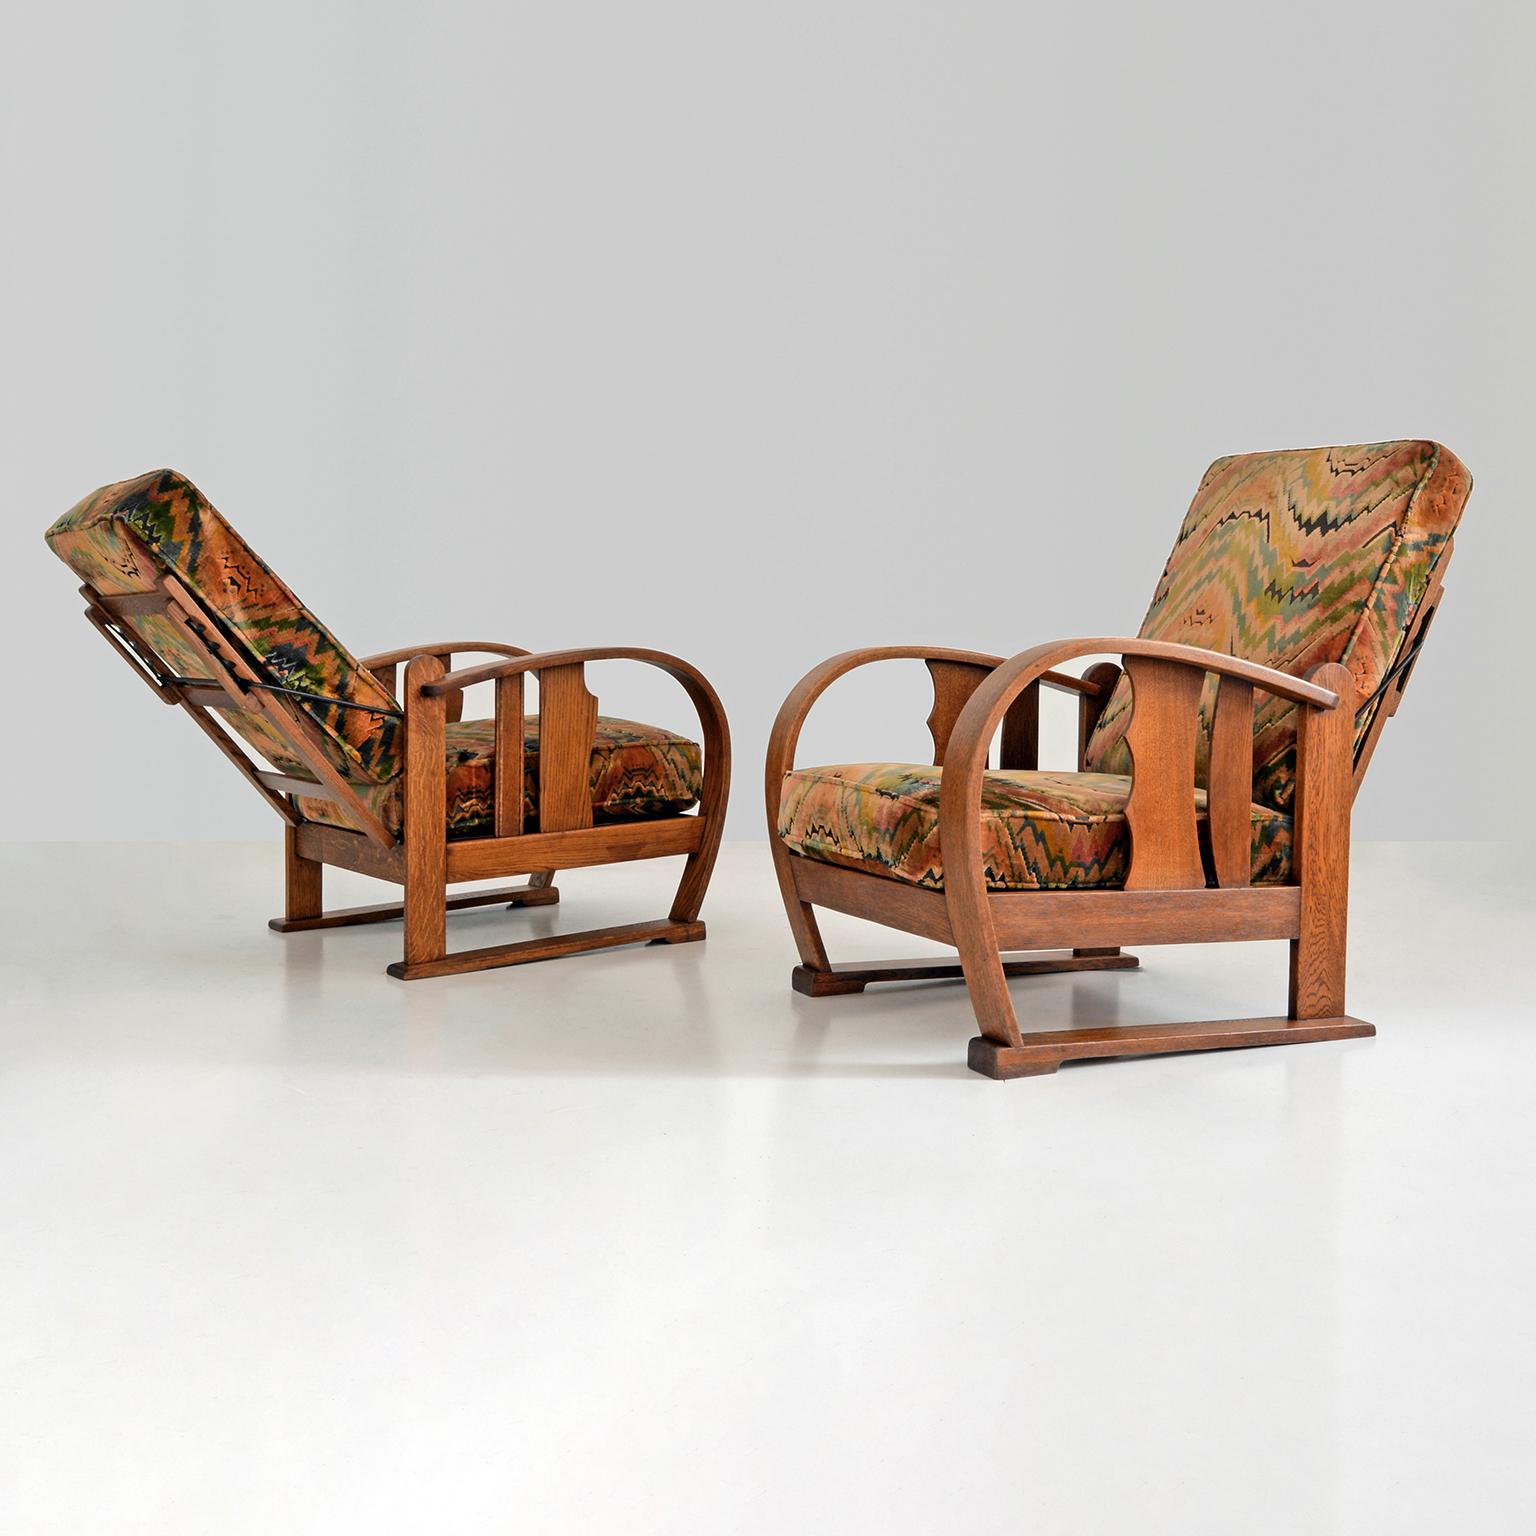 Pair of early Amsterdam School (1910-1930) reclining chairs manufactured c. 1920.
The exuberant appearance characteristic of the movement's first period features 
strong sculptural expressionist lines with elaborate details different from one chair